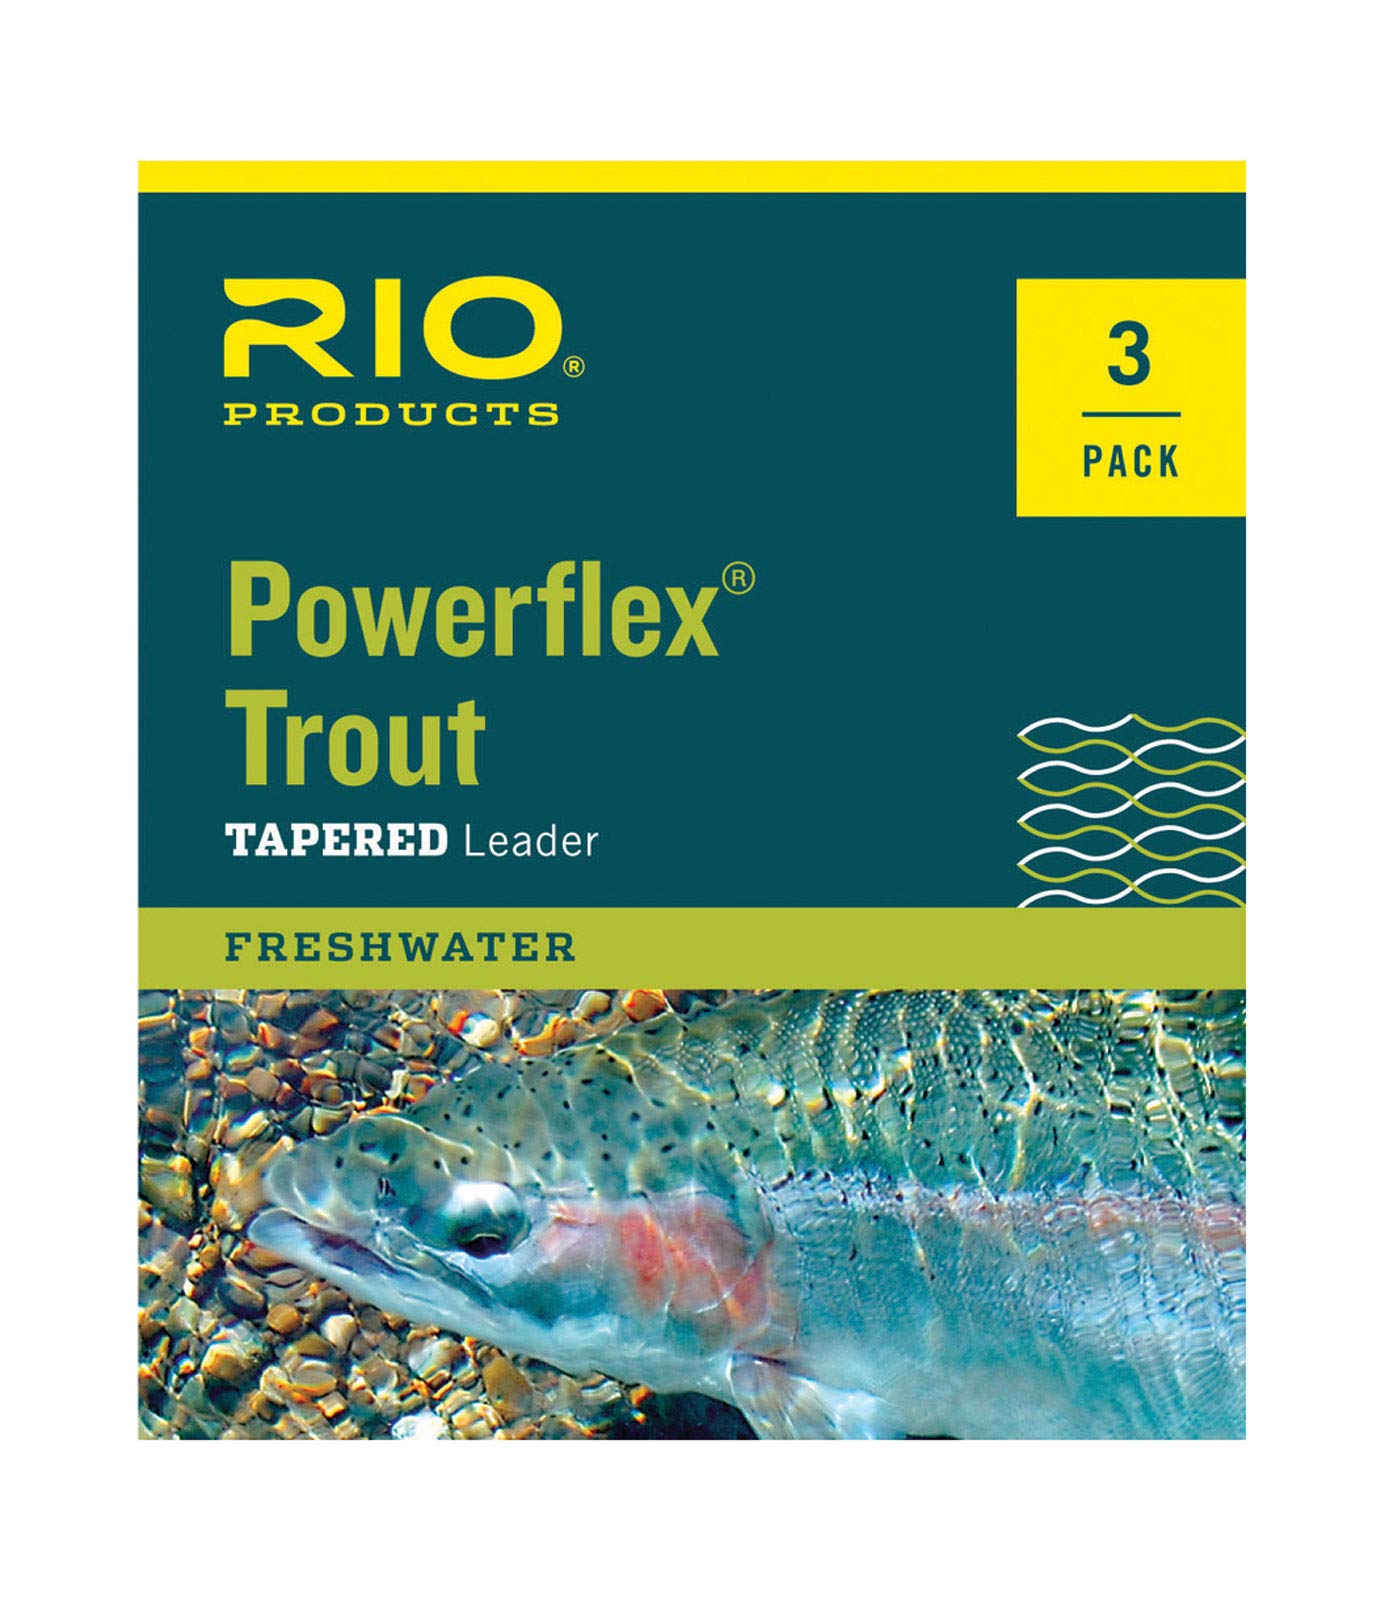 RIO Products Powerflex Trout 7.5ft Leader, Freshwater Tapered Fly Line, 3  Pack 5X